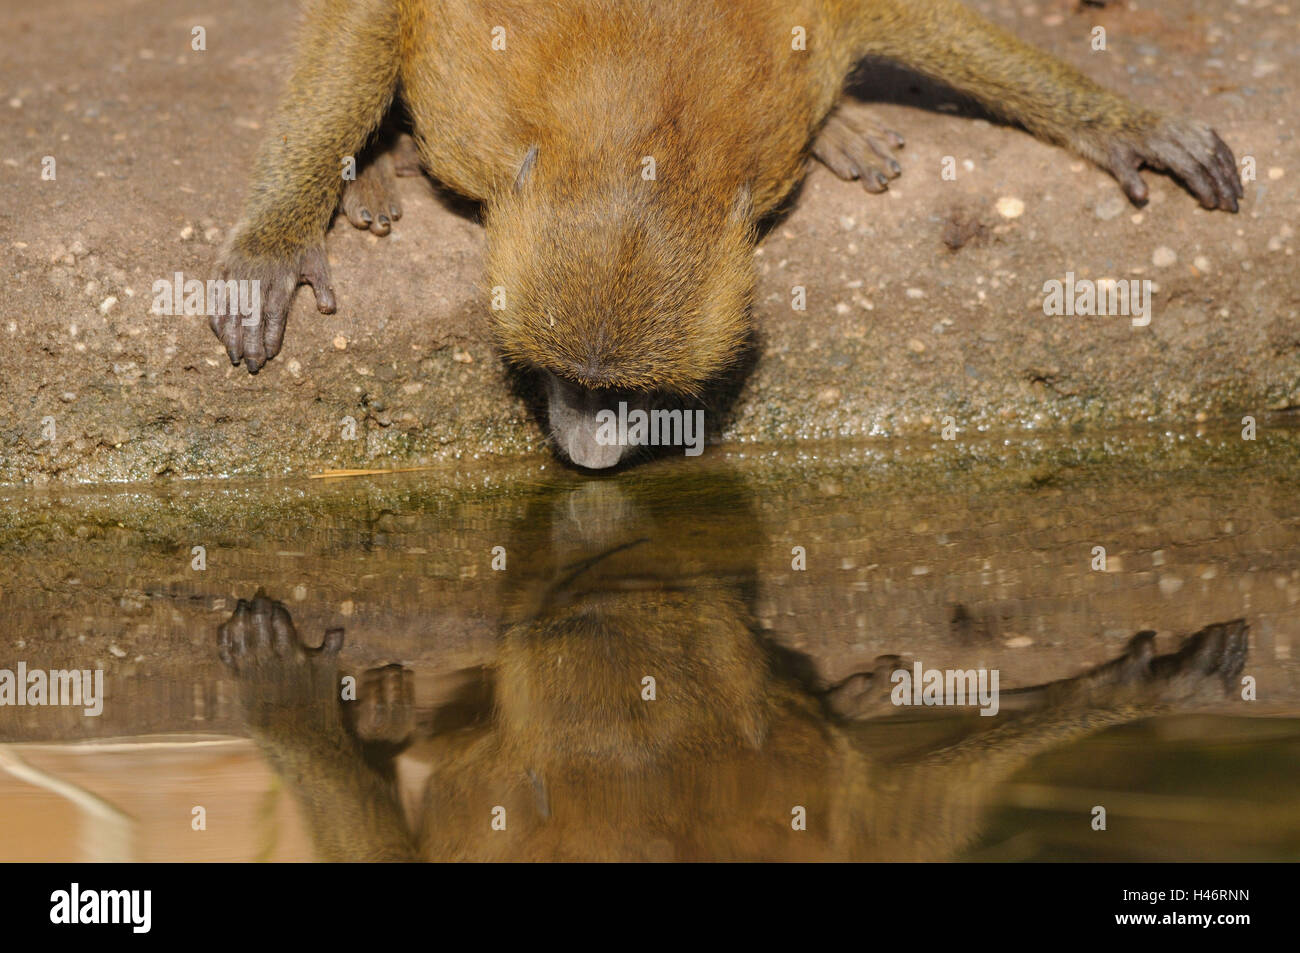 Guinea baboon, Papio papio, half portrait, shore, head-on, sit, drink water, focus to the foreground, Stock Photo